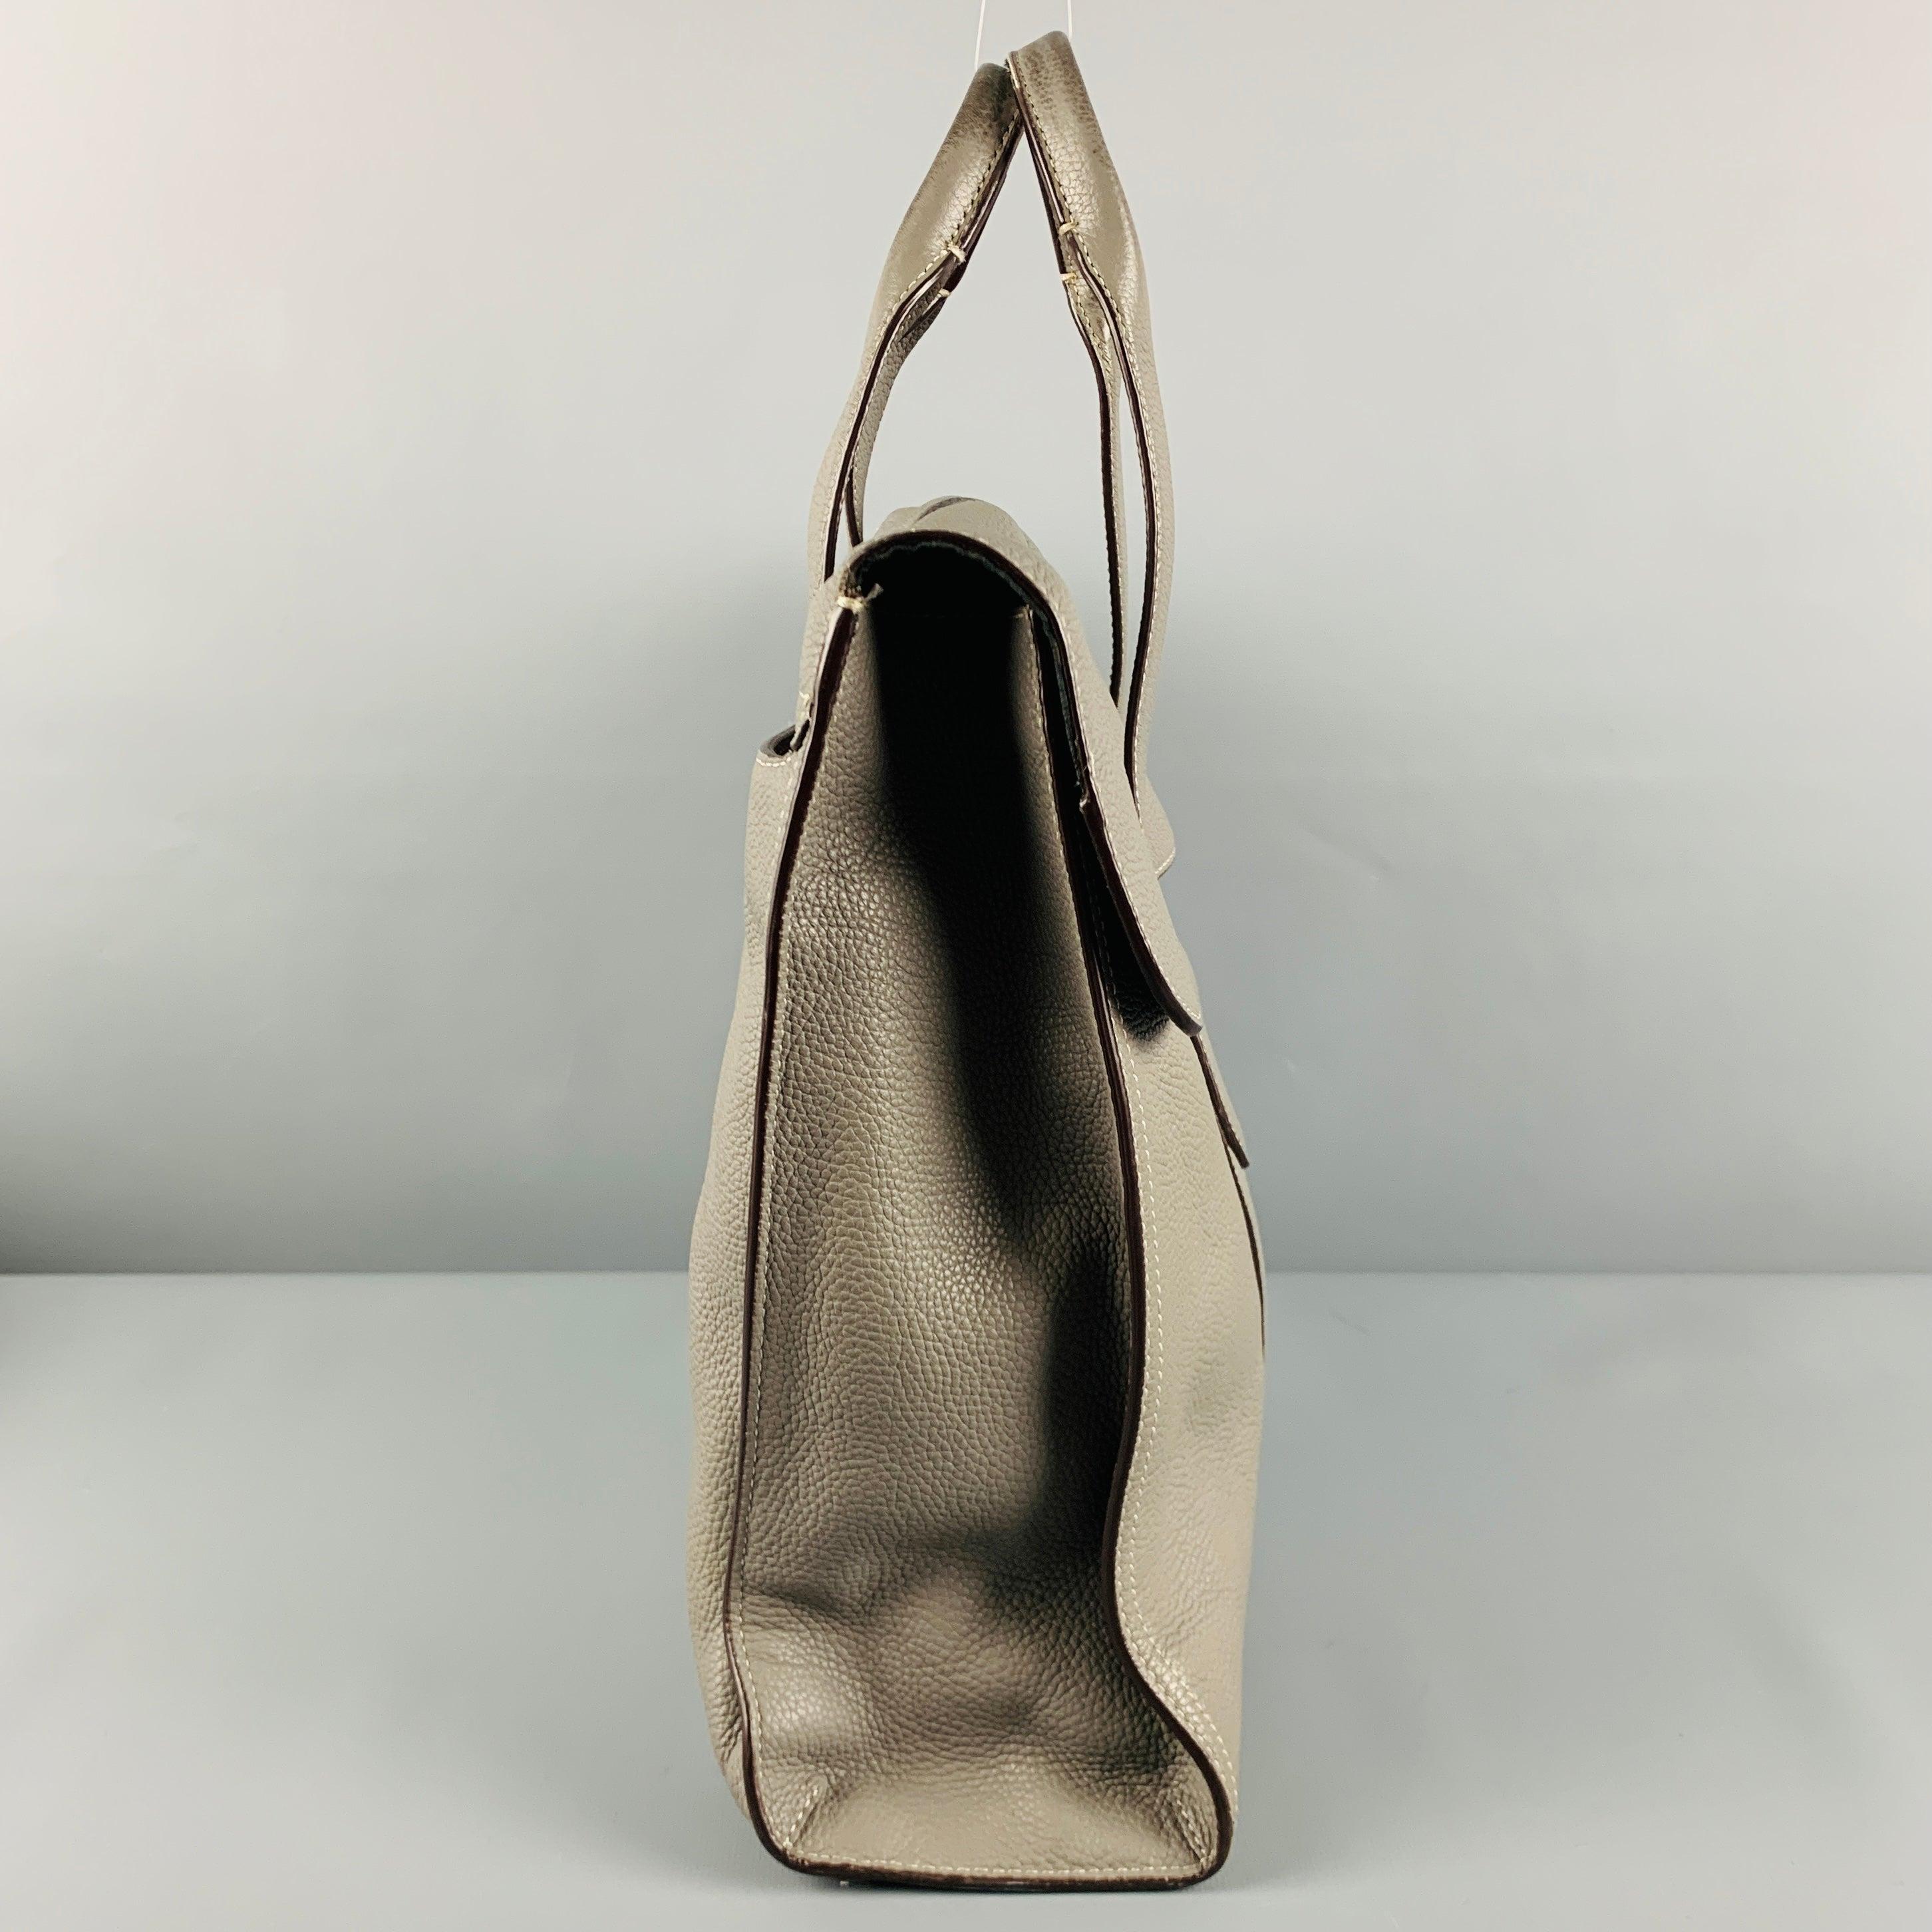 COACH bag
in a grey pebble grain leather fabric featuring a tote style, top handles with removable adjustable shoulder strap, spacious interior, and magnetic closure. Comes with dust bag.Very Good Pre-Owned Condition. 

Measurements: 
  Length: 15